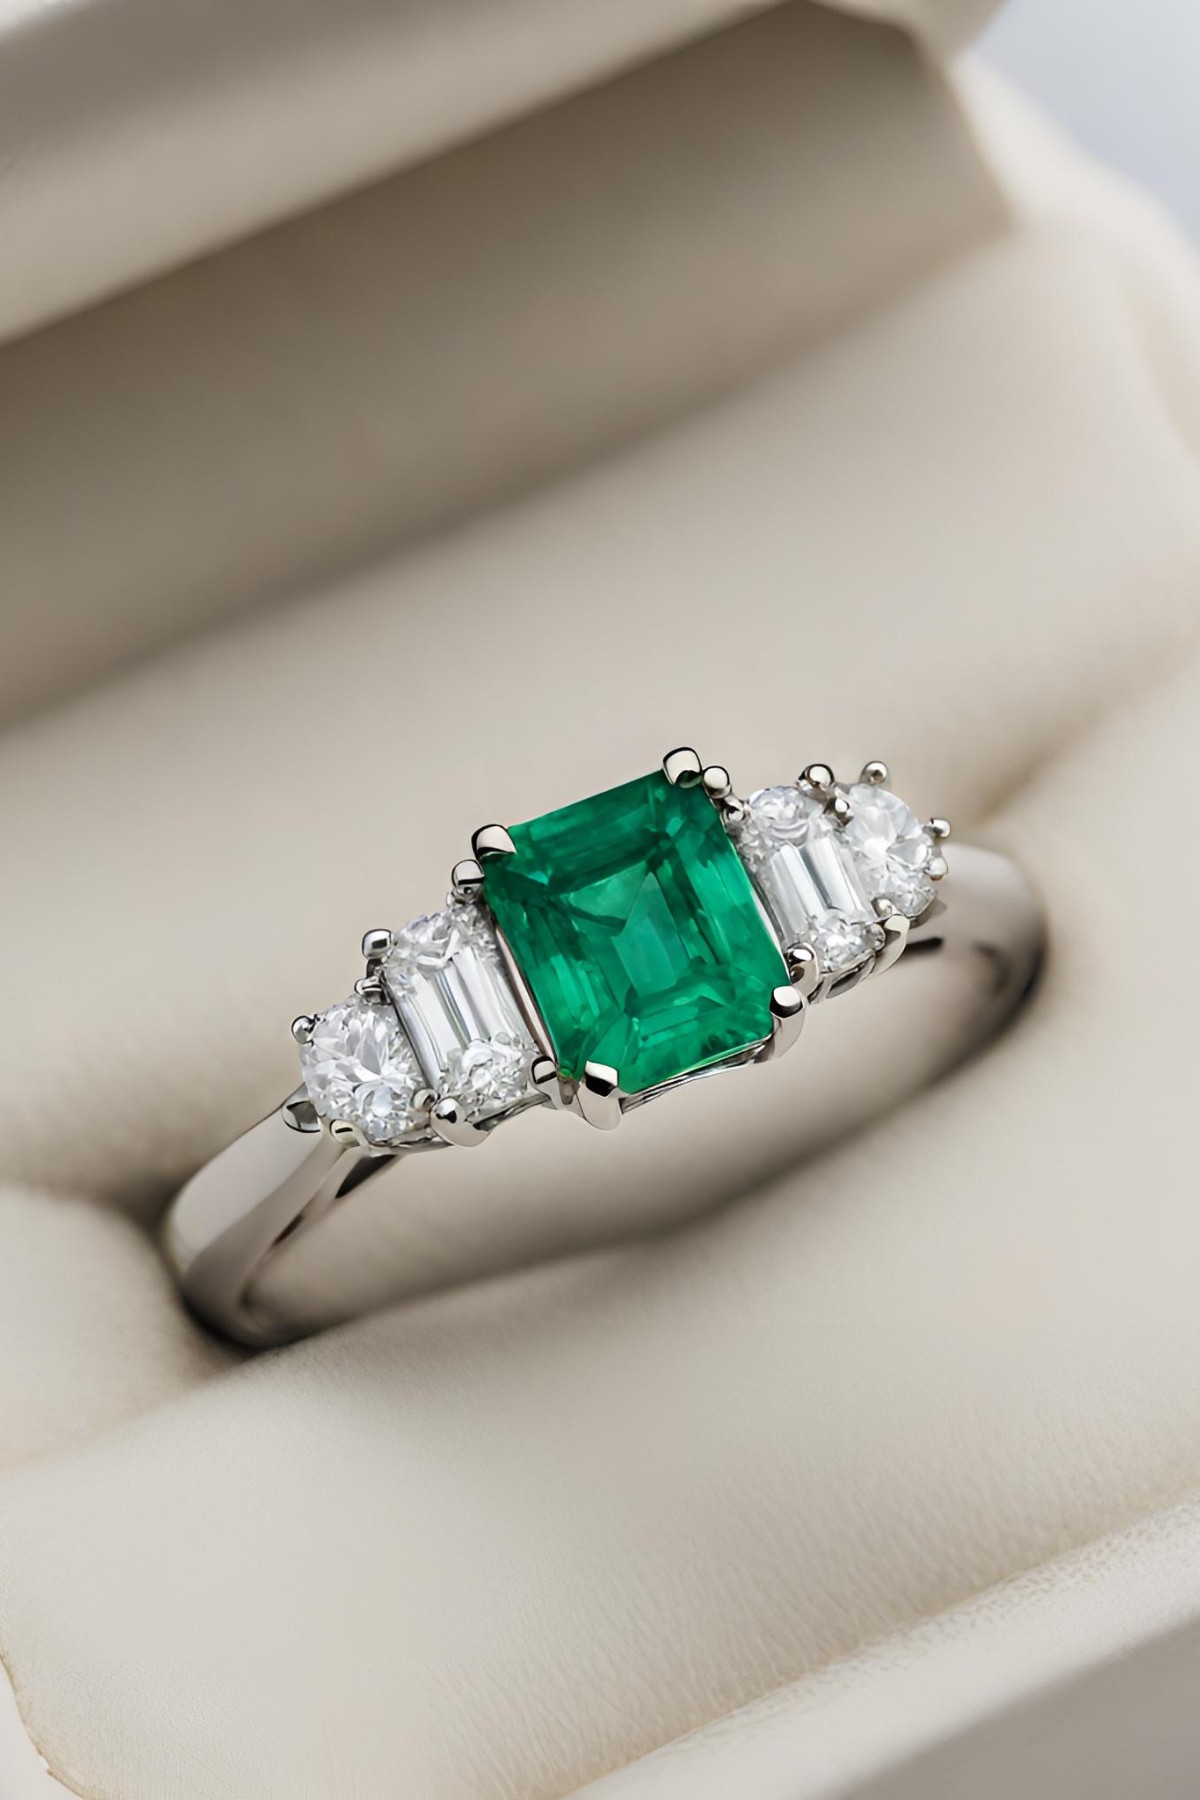 19 Best Green Emerald Engagement Rings - Jewelry Material Guide